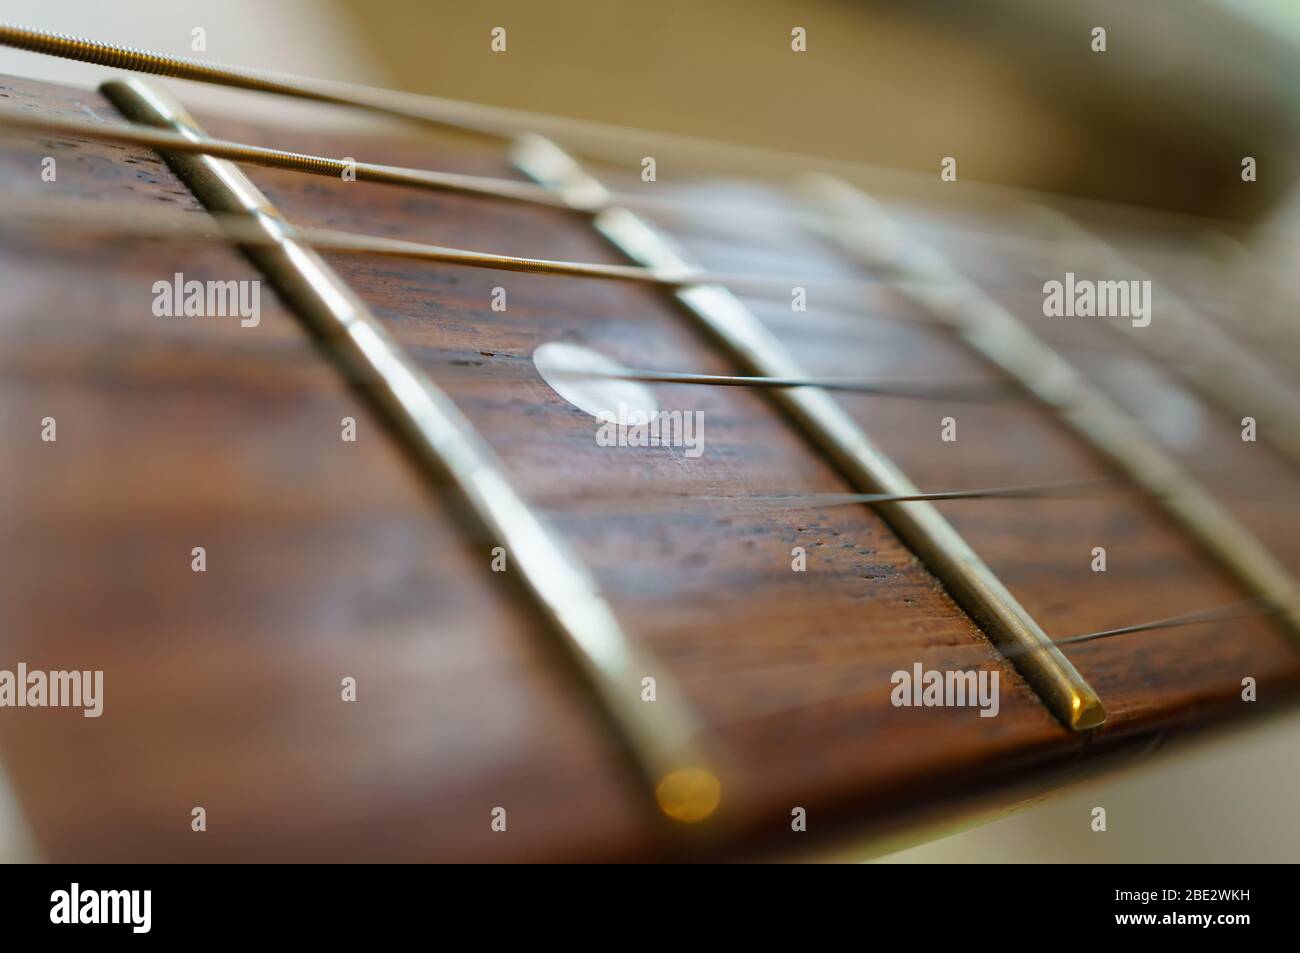 Fragment of a guitar fretboard with strings. Soft focus, shallow depth of field Stock Photo